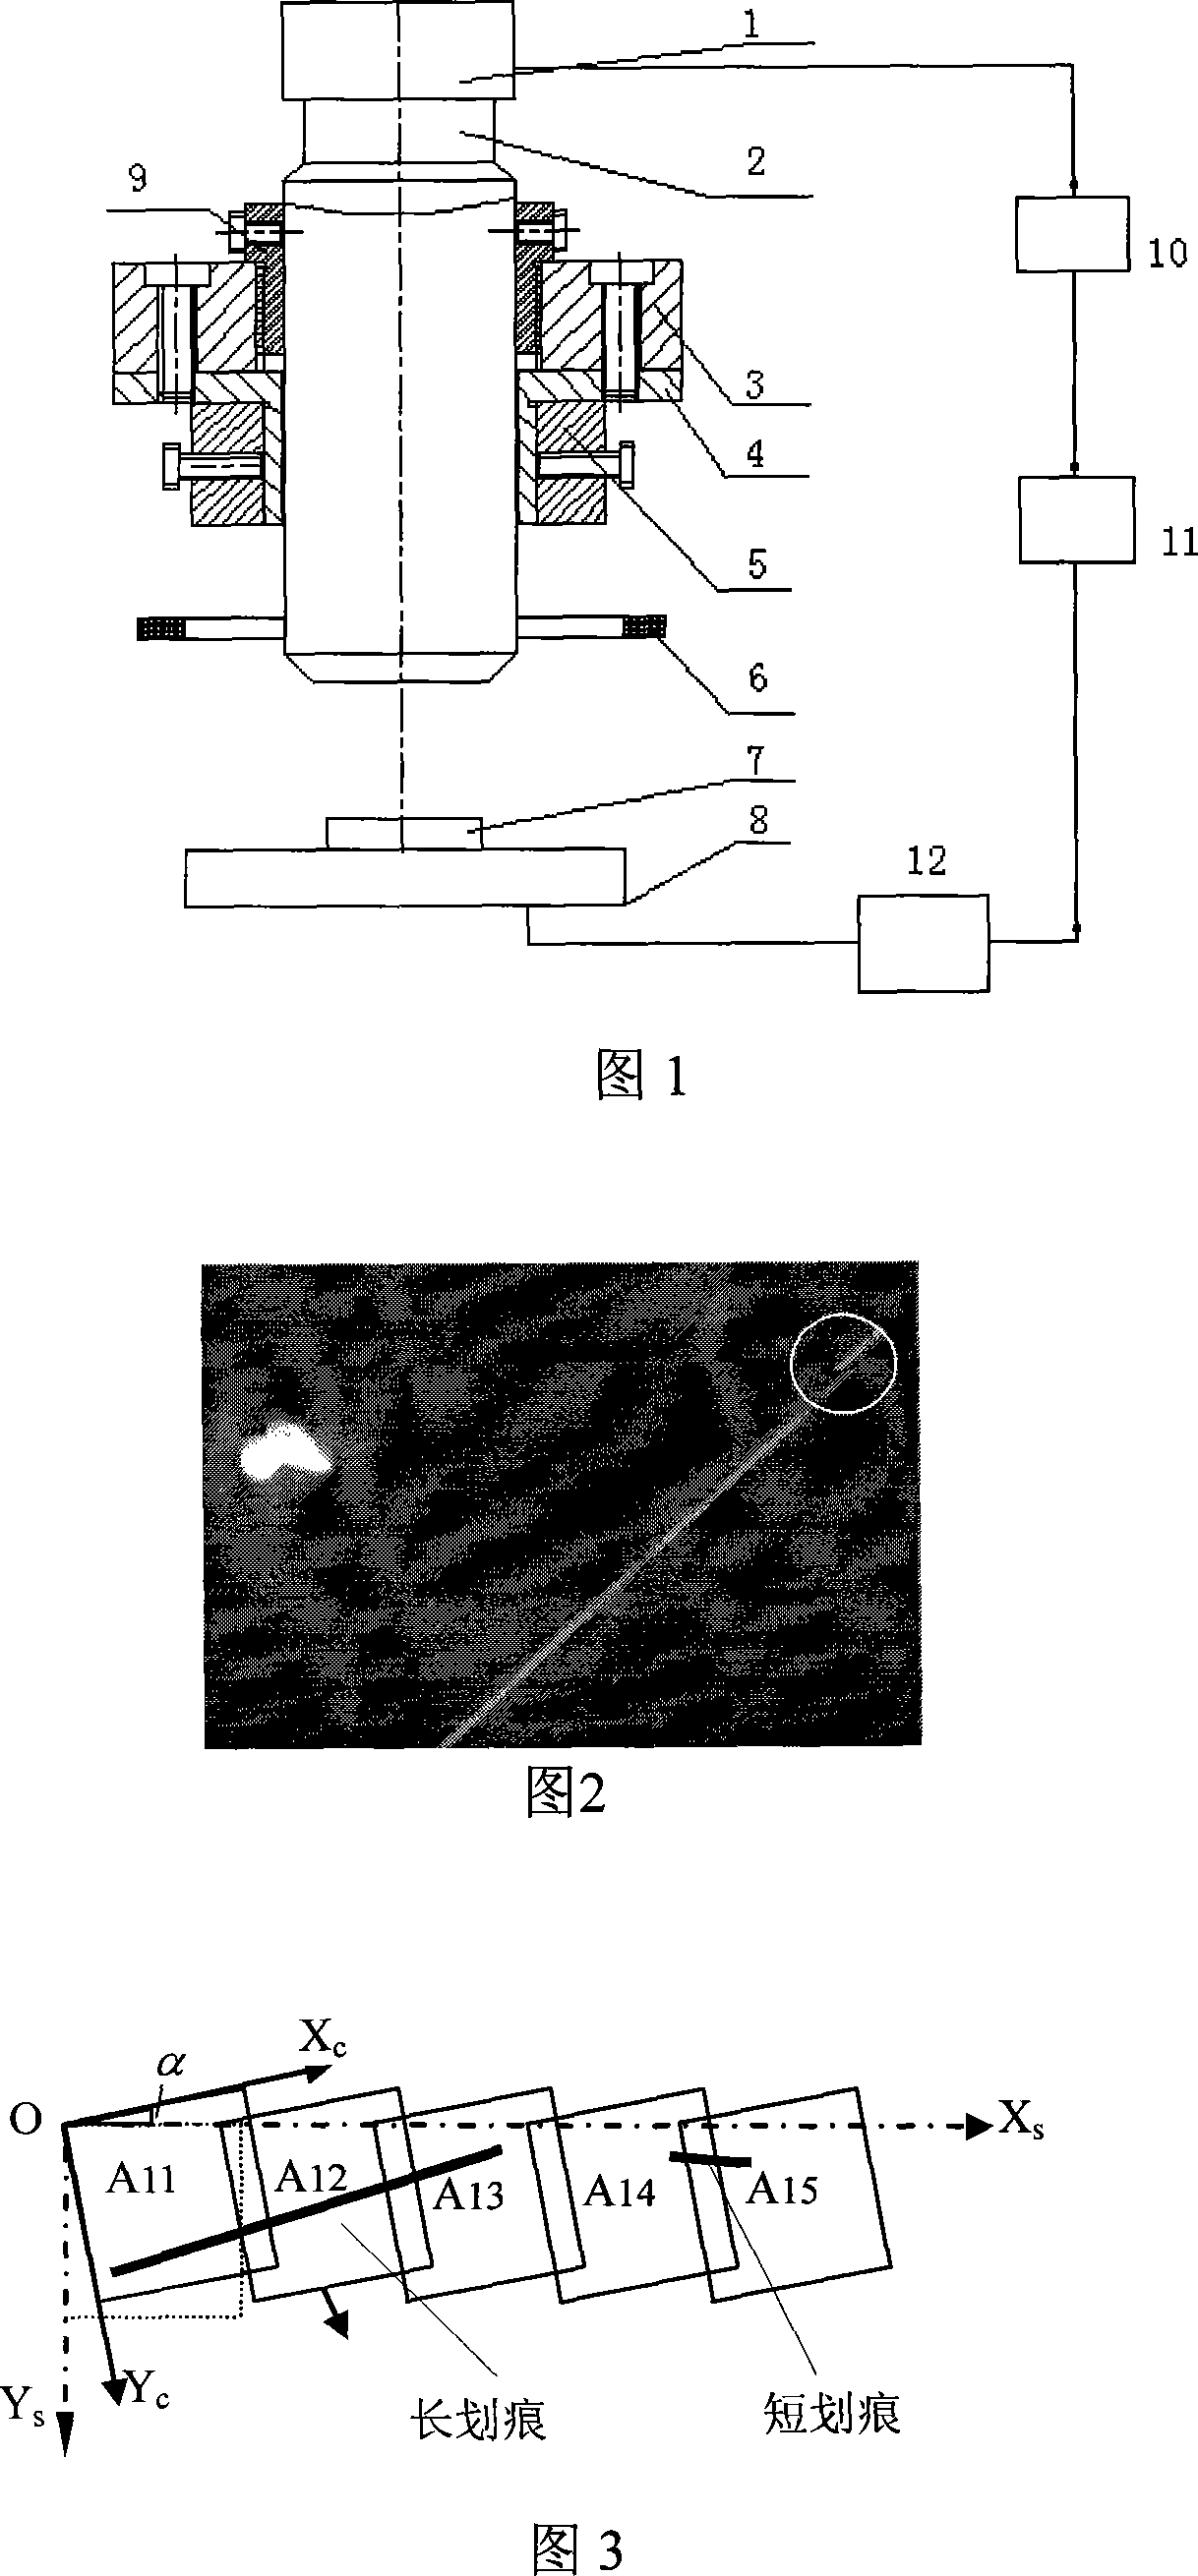 Object image coordinate error regulation device and method when spicing surface flaw detecting image